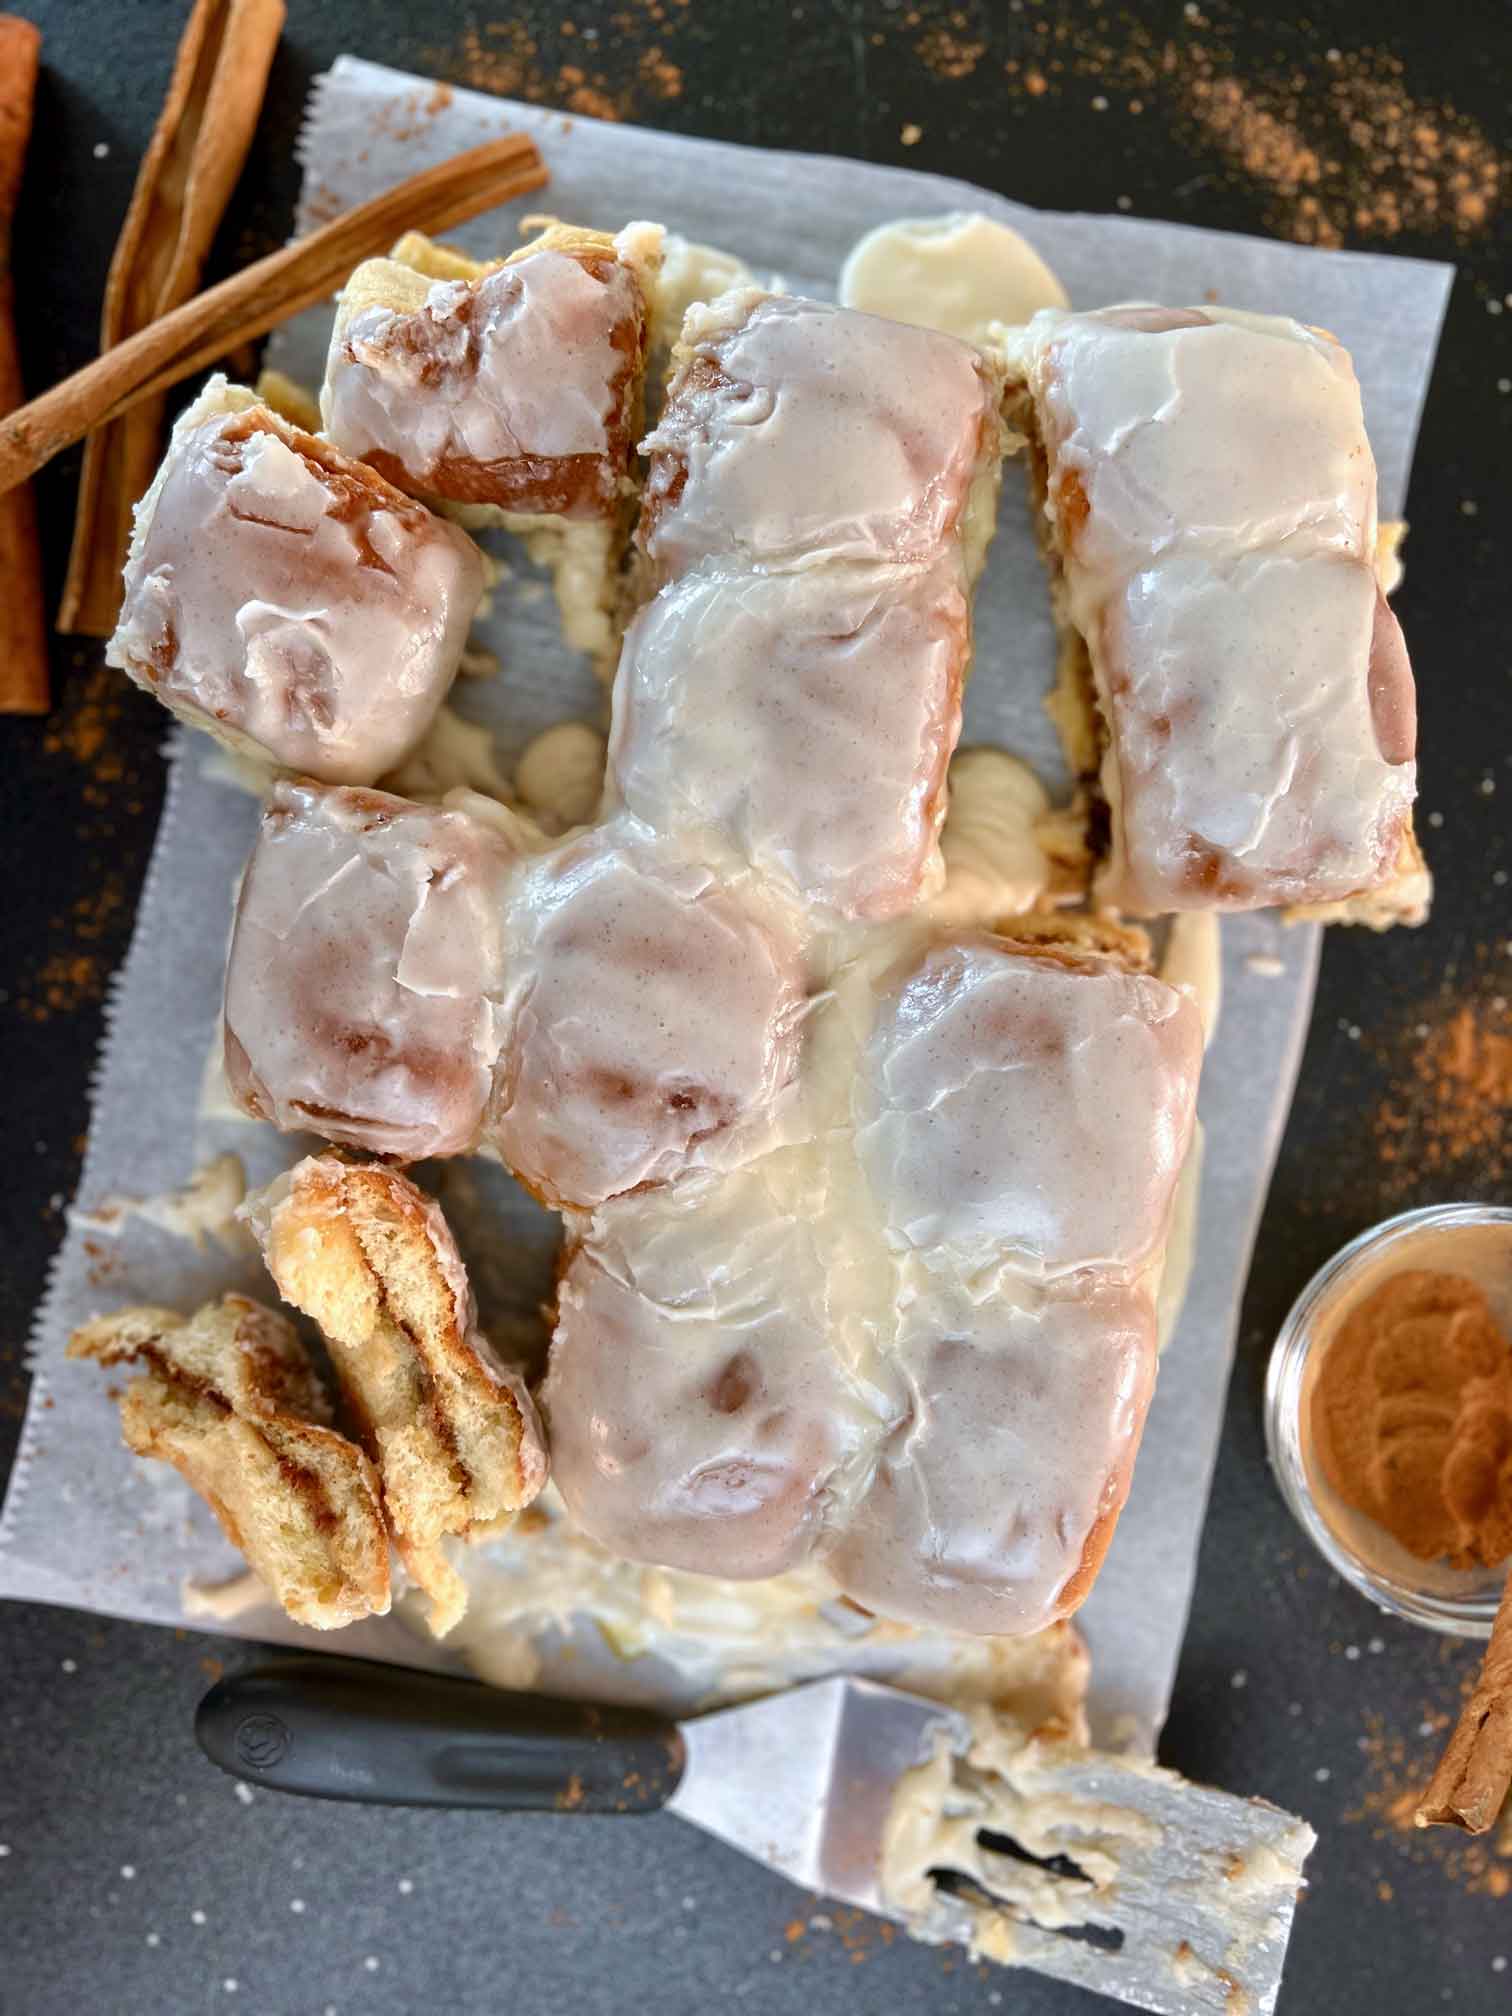 Hawaiian Cinnamon Sweet Rolls with Ground Cinnamon and sticks arranged on parchment paper